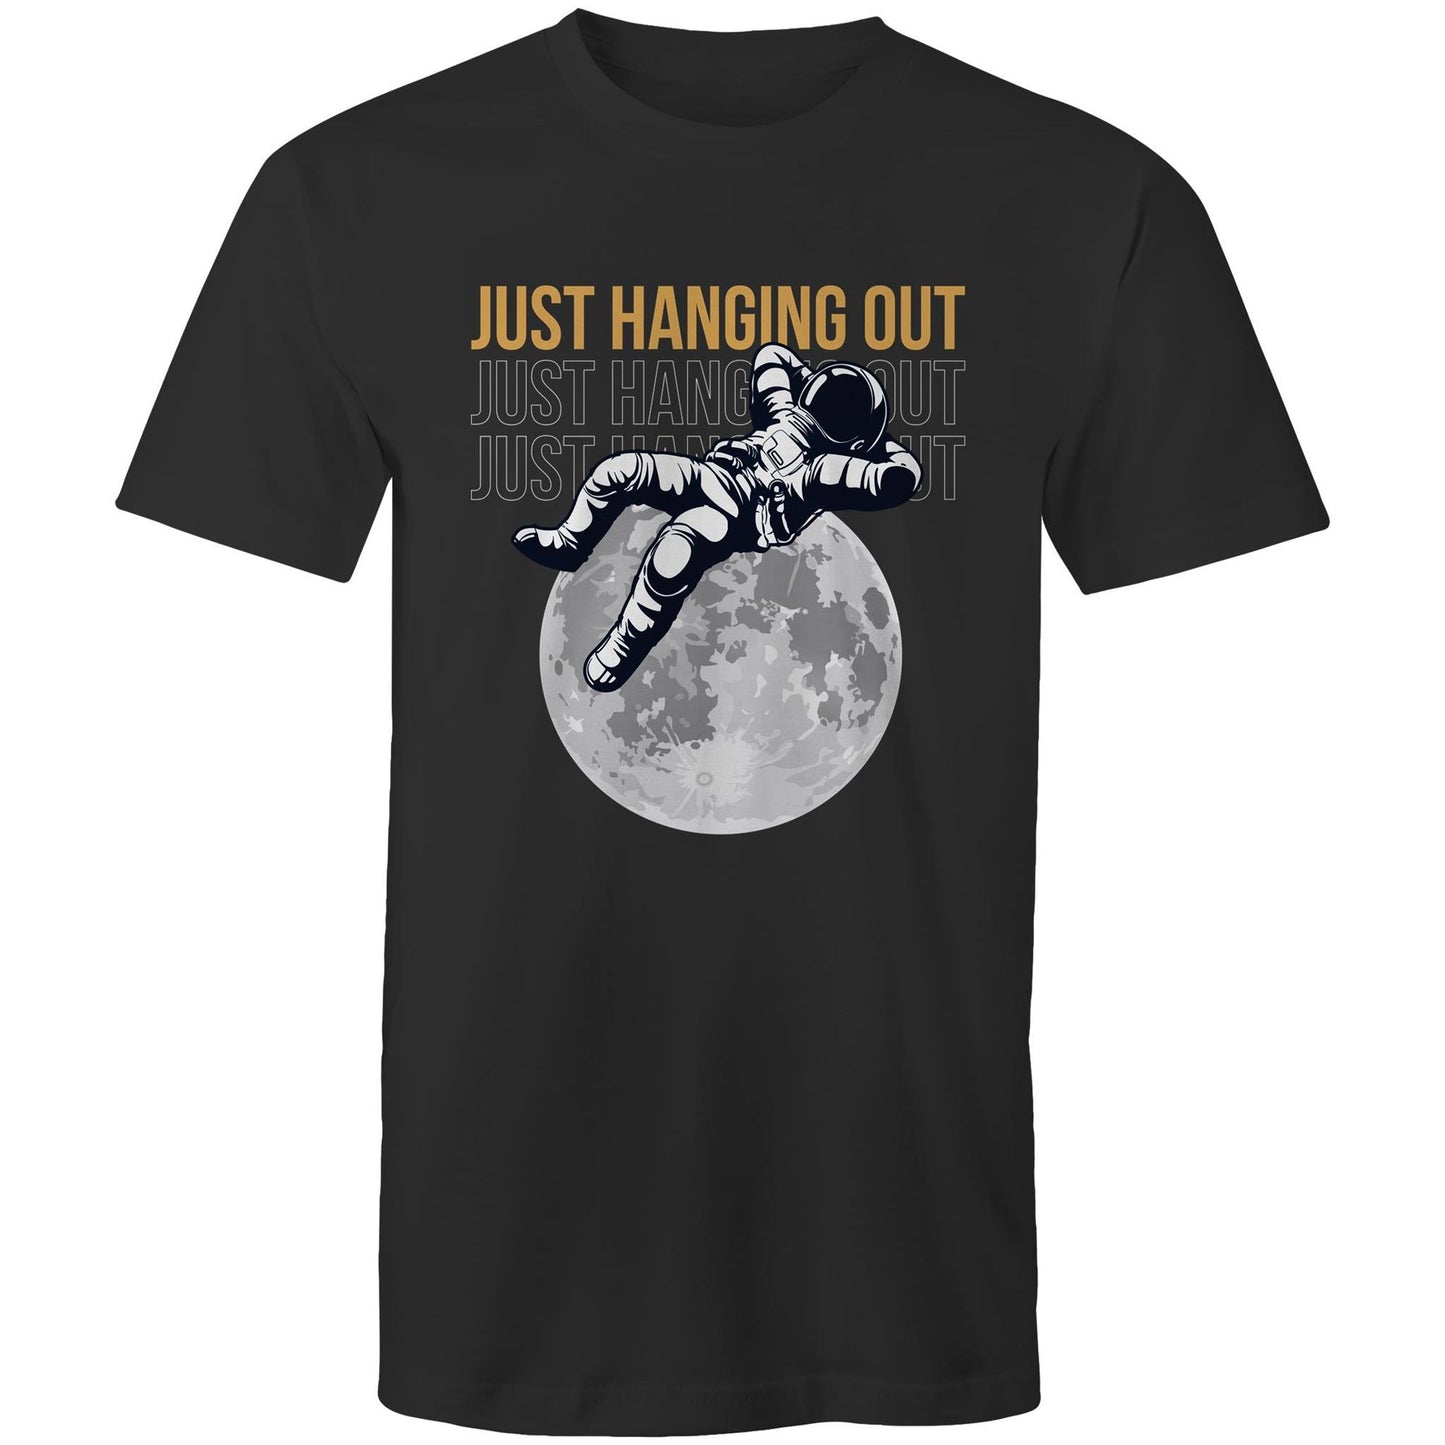 Just Hanging Out - Mens T-Shirt Black Mens T-shirt Space